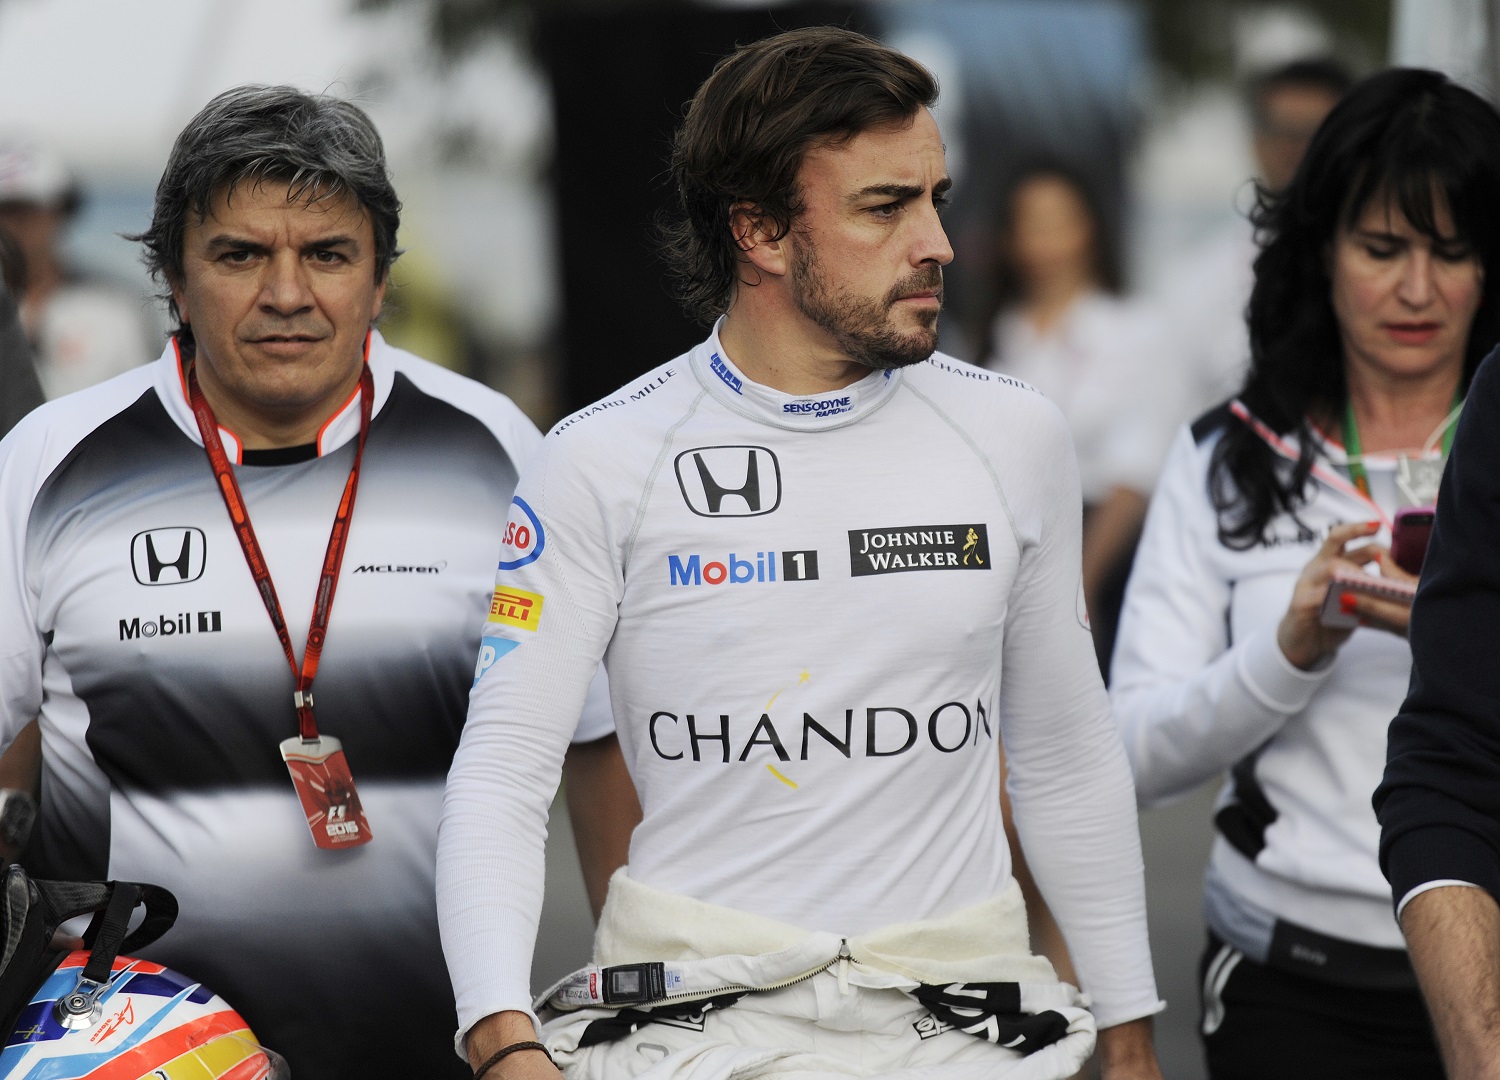 McLaren driver Fernando Alonso of Spain walks back to his team garage following a crash during the Australian Formula One Grand Prix at Albert Park in Melbourne, Australia, Sunday, March 20, 2016. (AP Photo/Ross Land)